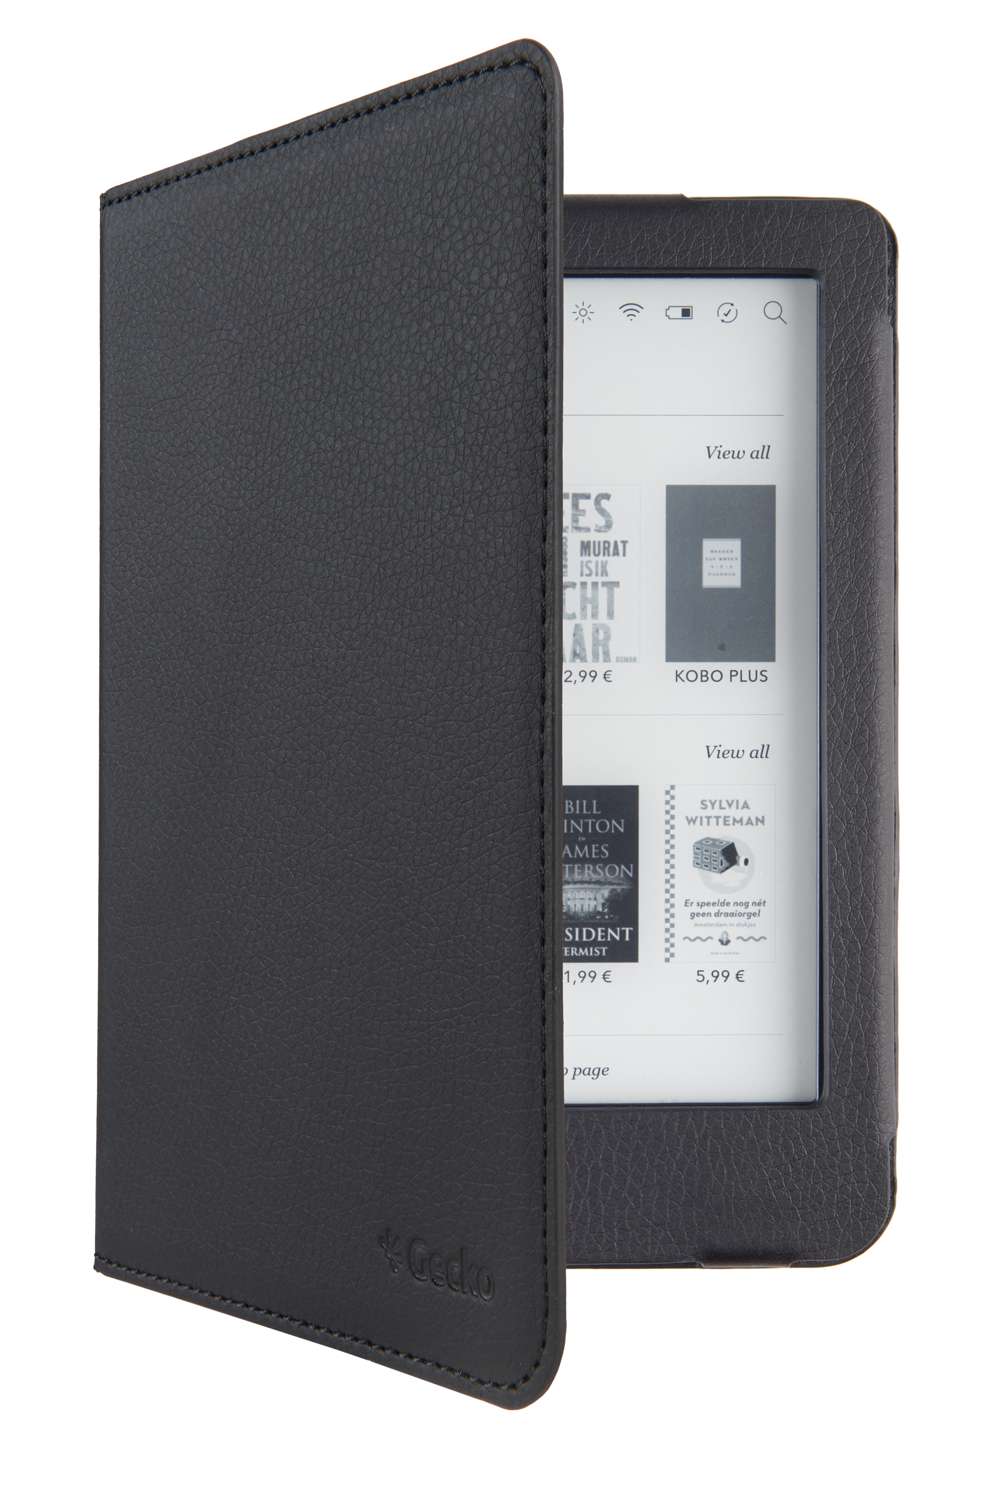 Smart Cover For Funda Kobo Clara HD Case 6.0 inch Soft Fabric Stand Ereader  Case Coque For Kobo Clara HD Handheld Ebook Cover